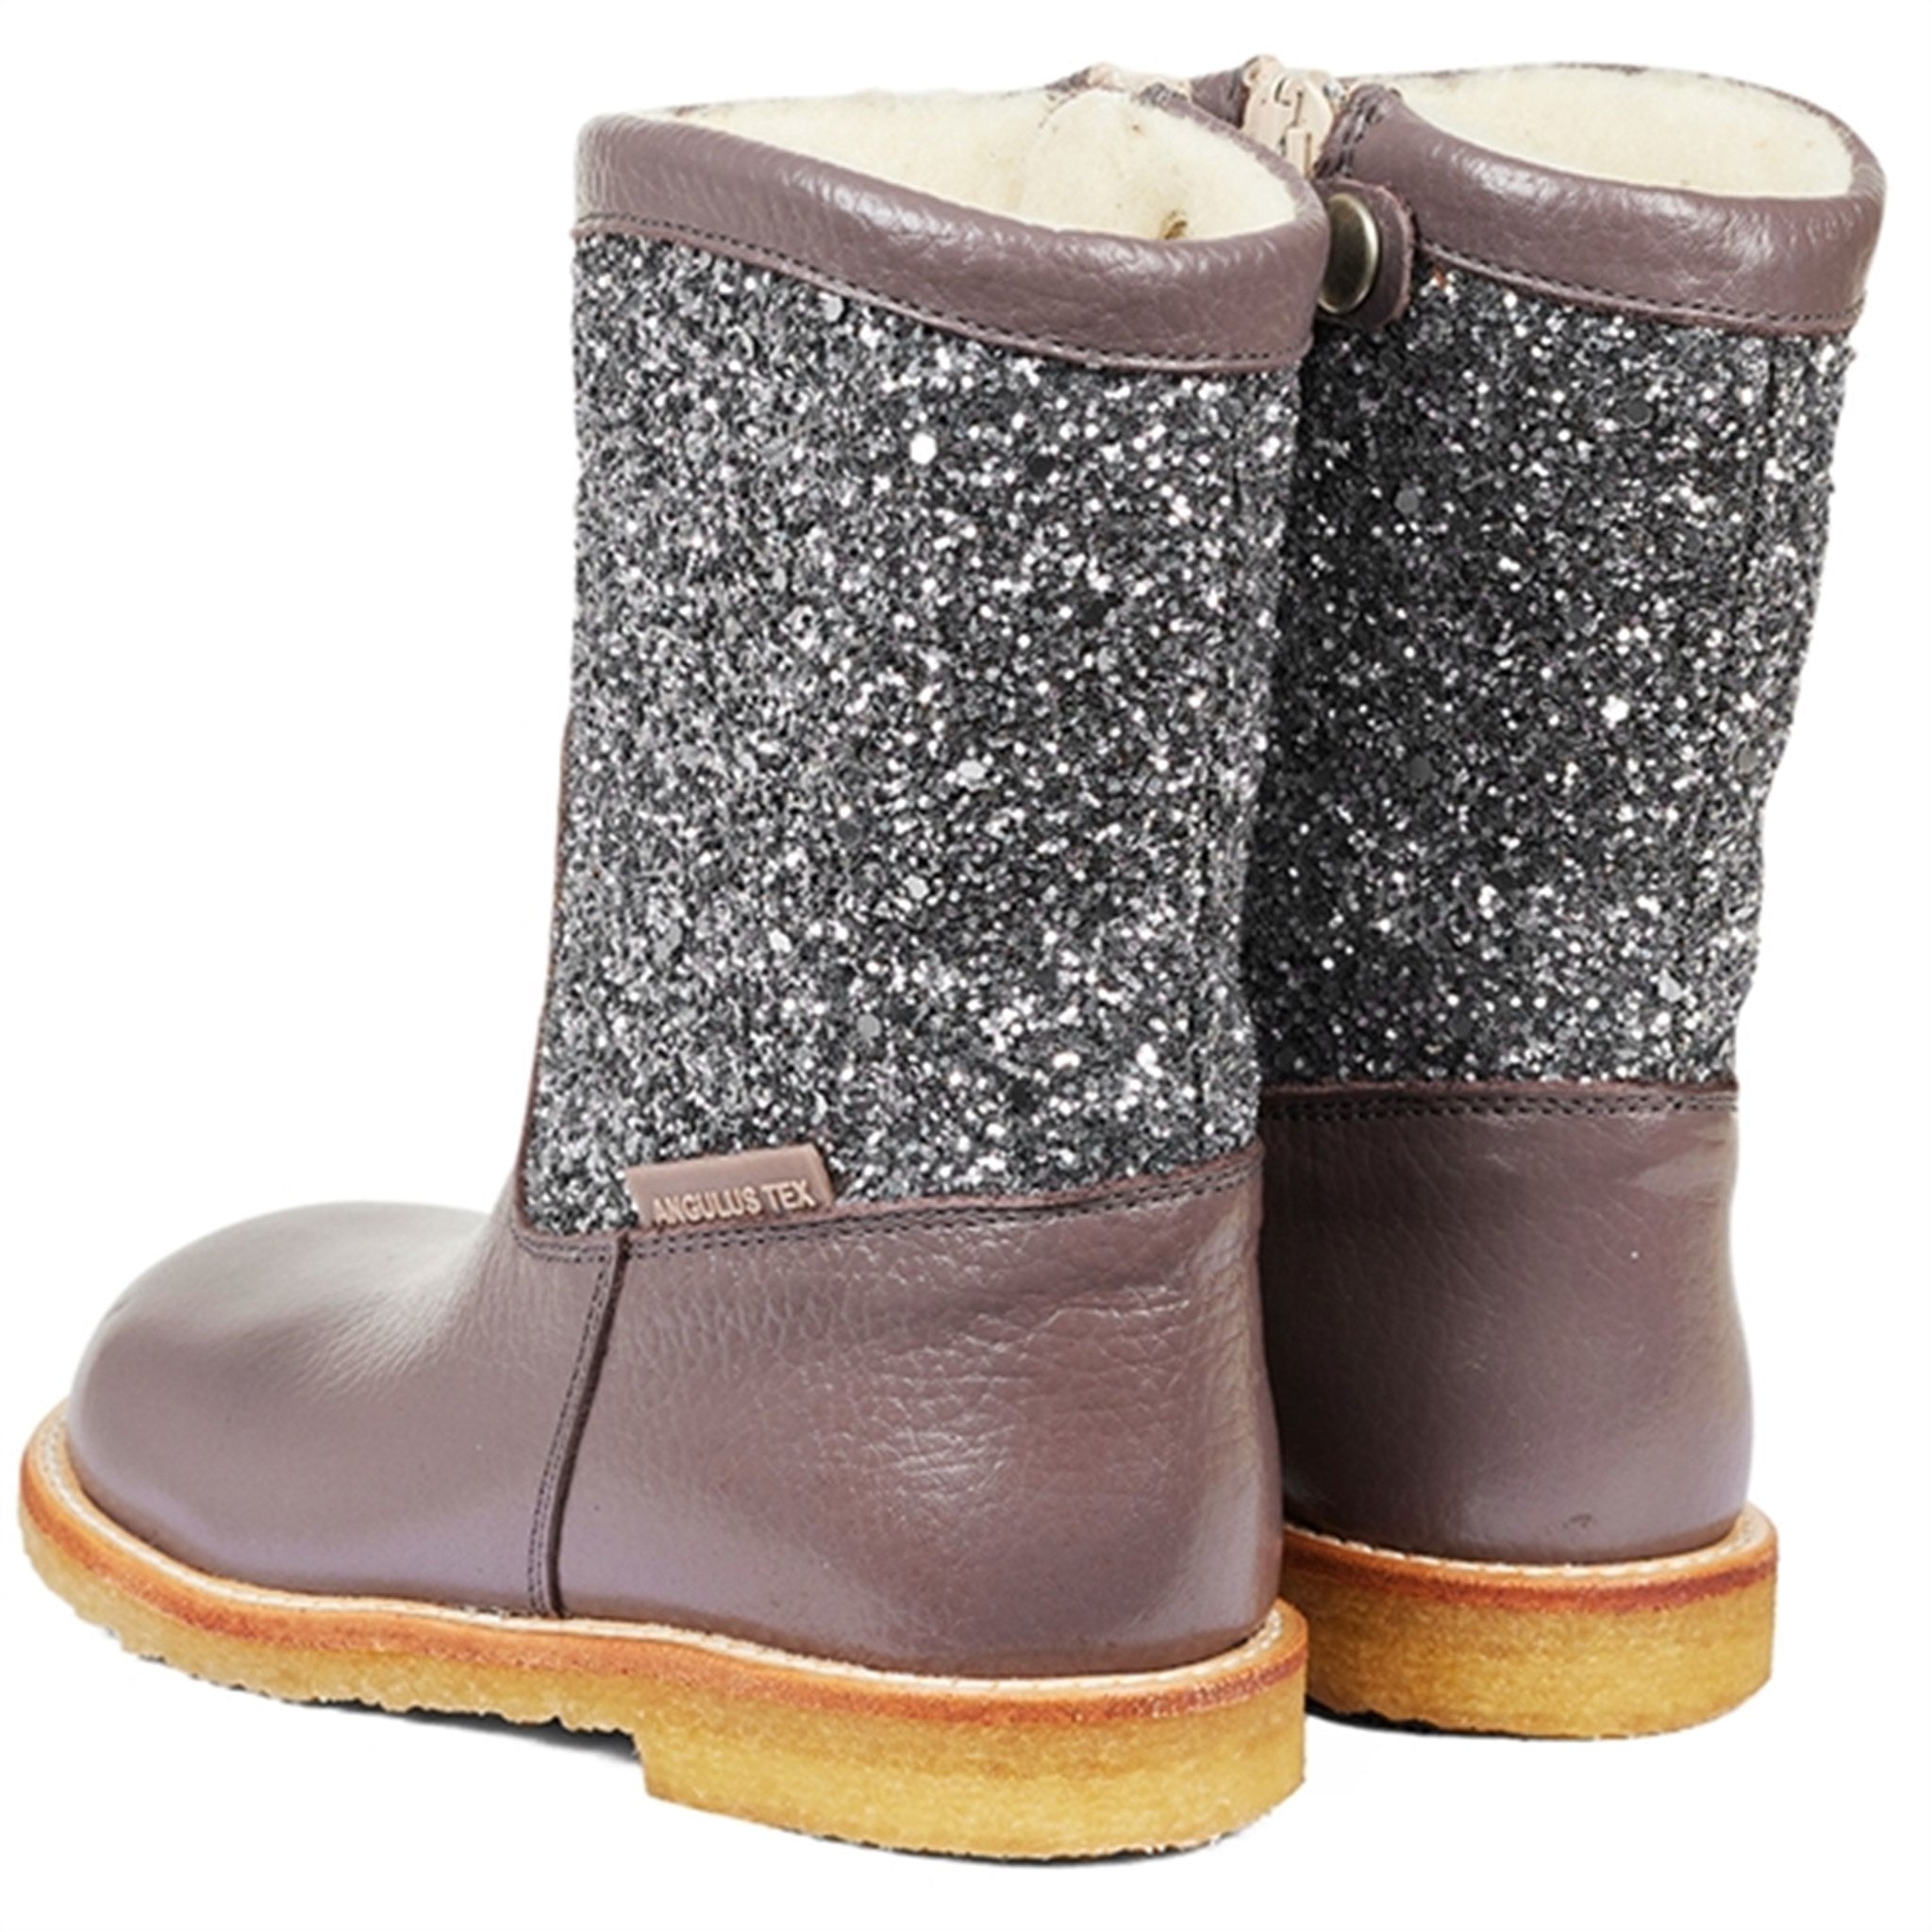 Angulus Tex Boots With Zipper Lavender/Dusty Lavender Glitter 3